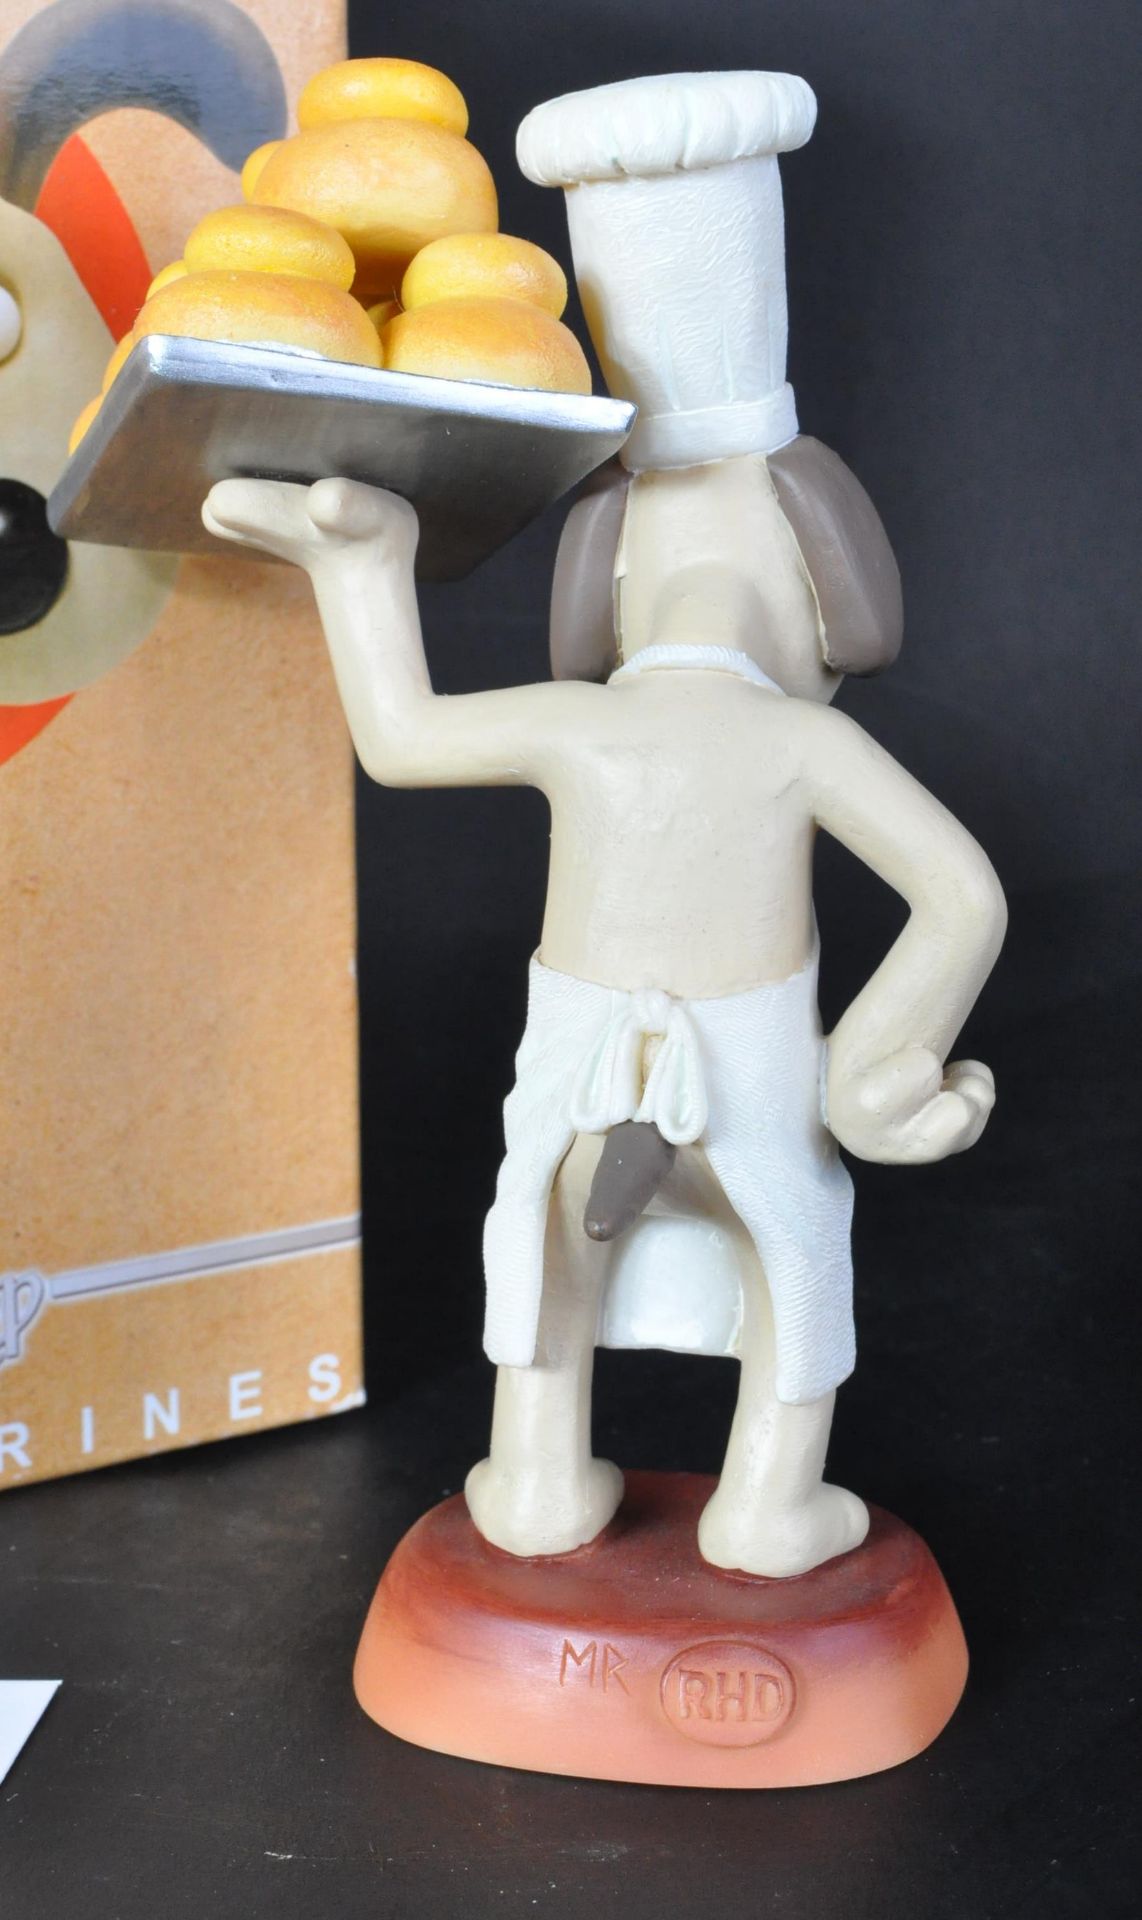 WALLACE & GROMIT - ROBERT HARROP - LIMITED EDITION FIGURINE - Image 4 of 6